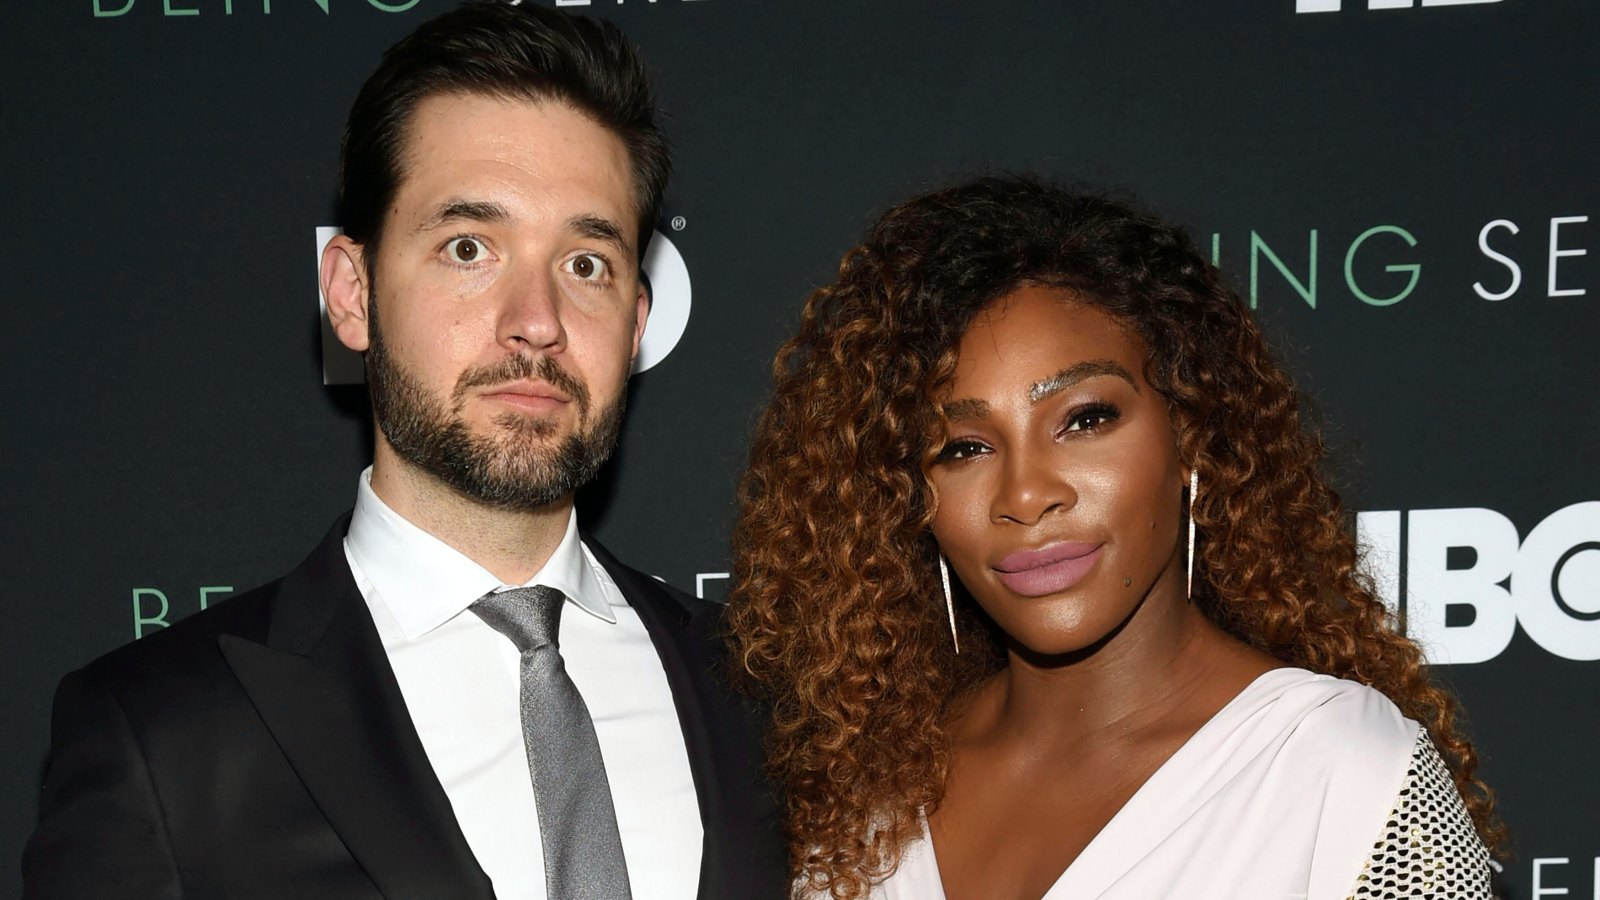 Serena Williams Shares Sweet Photo for 2-Year Anniversary With Husband Alexis Ohanian